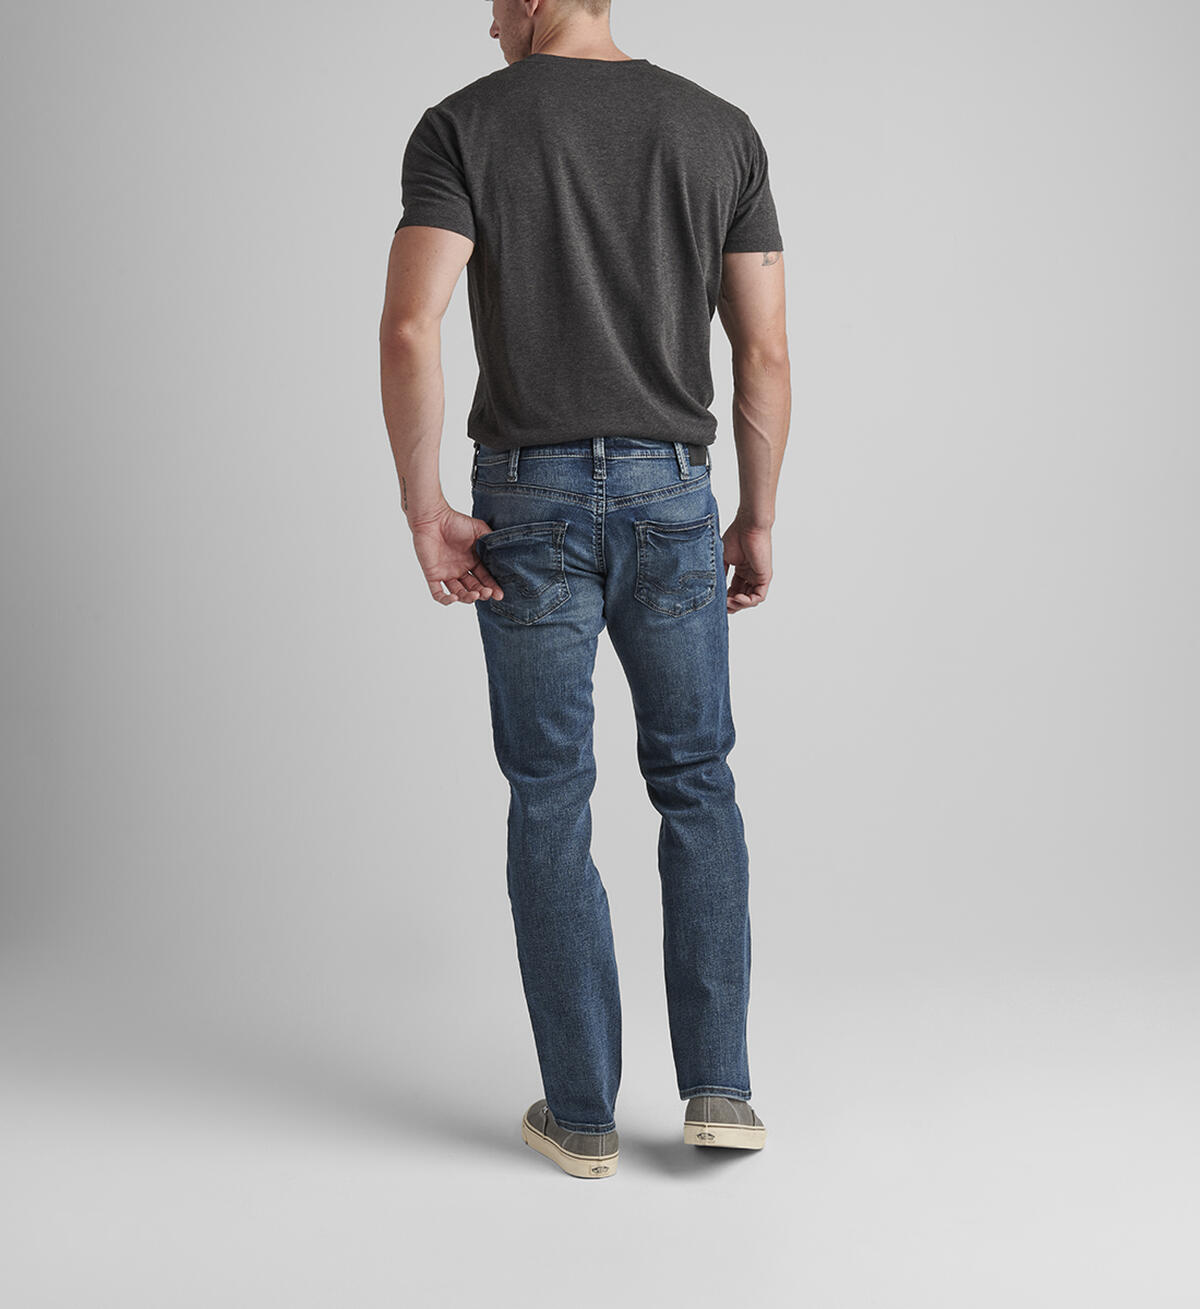 Allan Classic Fit Straight Leg Jeans, , hi-res image number 1